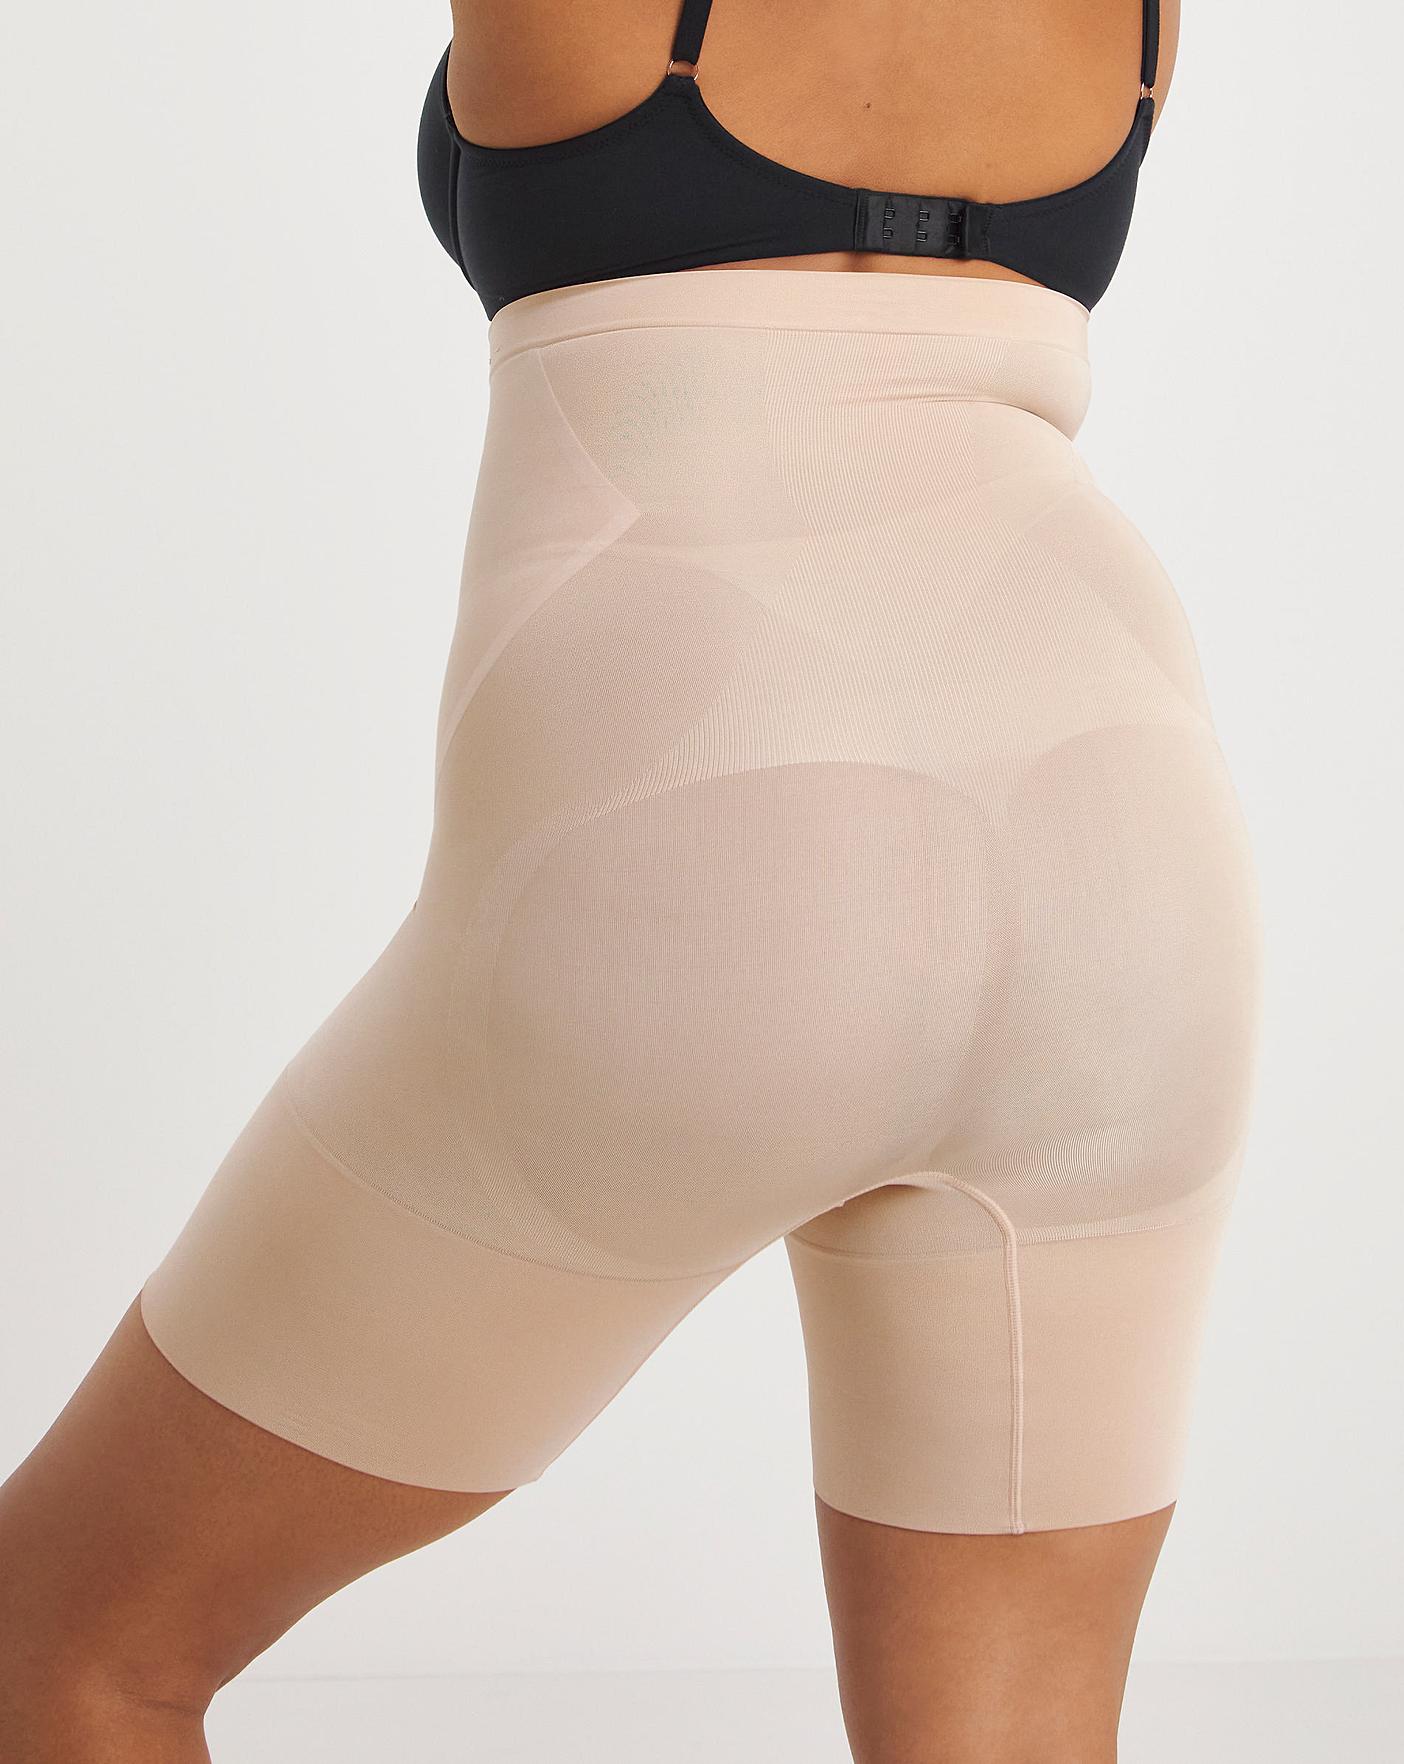 NEW Spanx Oncore High Waist Mid Thigh Shaper in Soft Nude [SZ